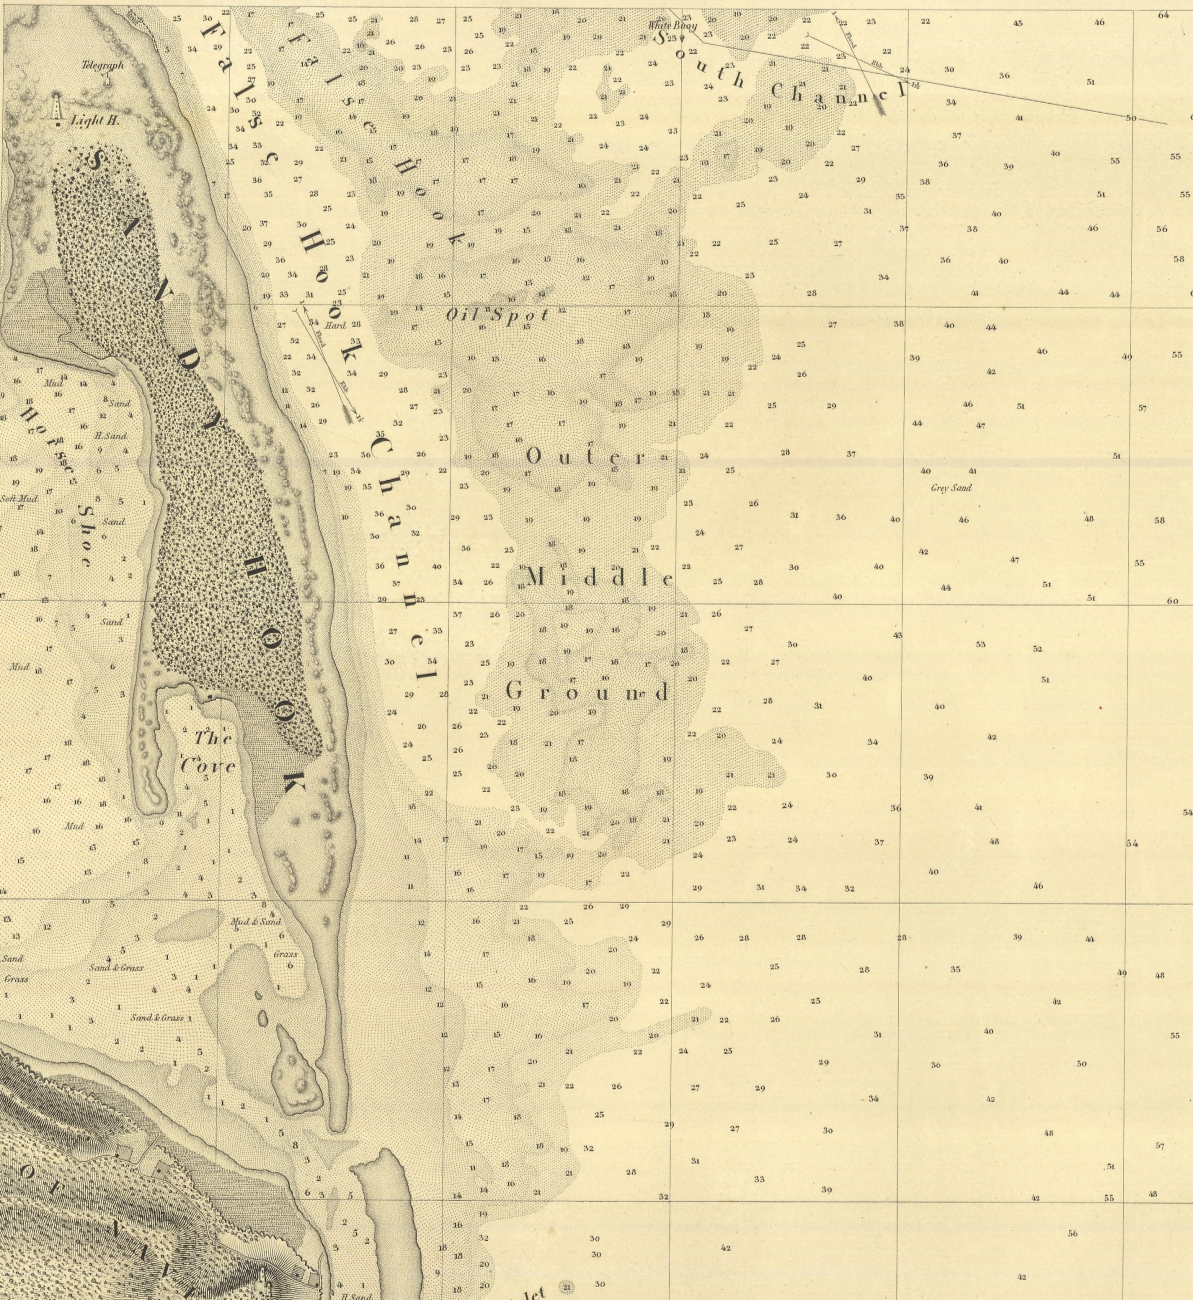 Section of SE sheet of six sheets of New York Bay and Harbor showing FalseHook Channel, the primary means of approaching New York Harbor prior to theCoast Survey work of 1835